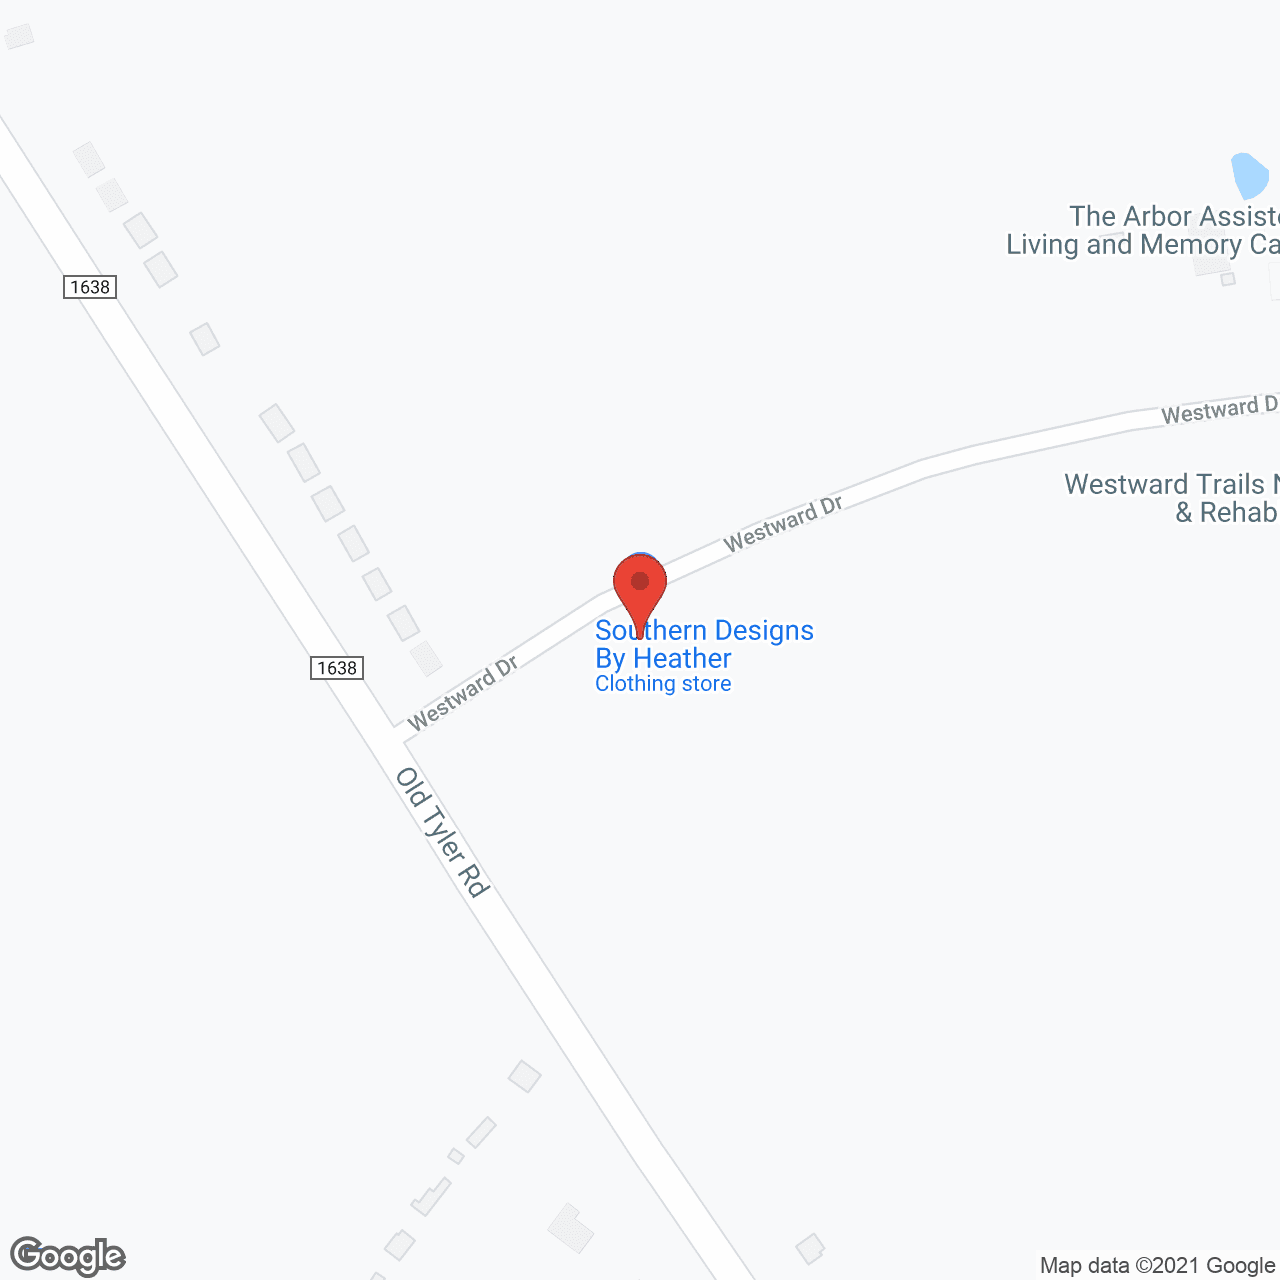 The Arbor Assisted Living and Memory Care in google map